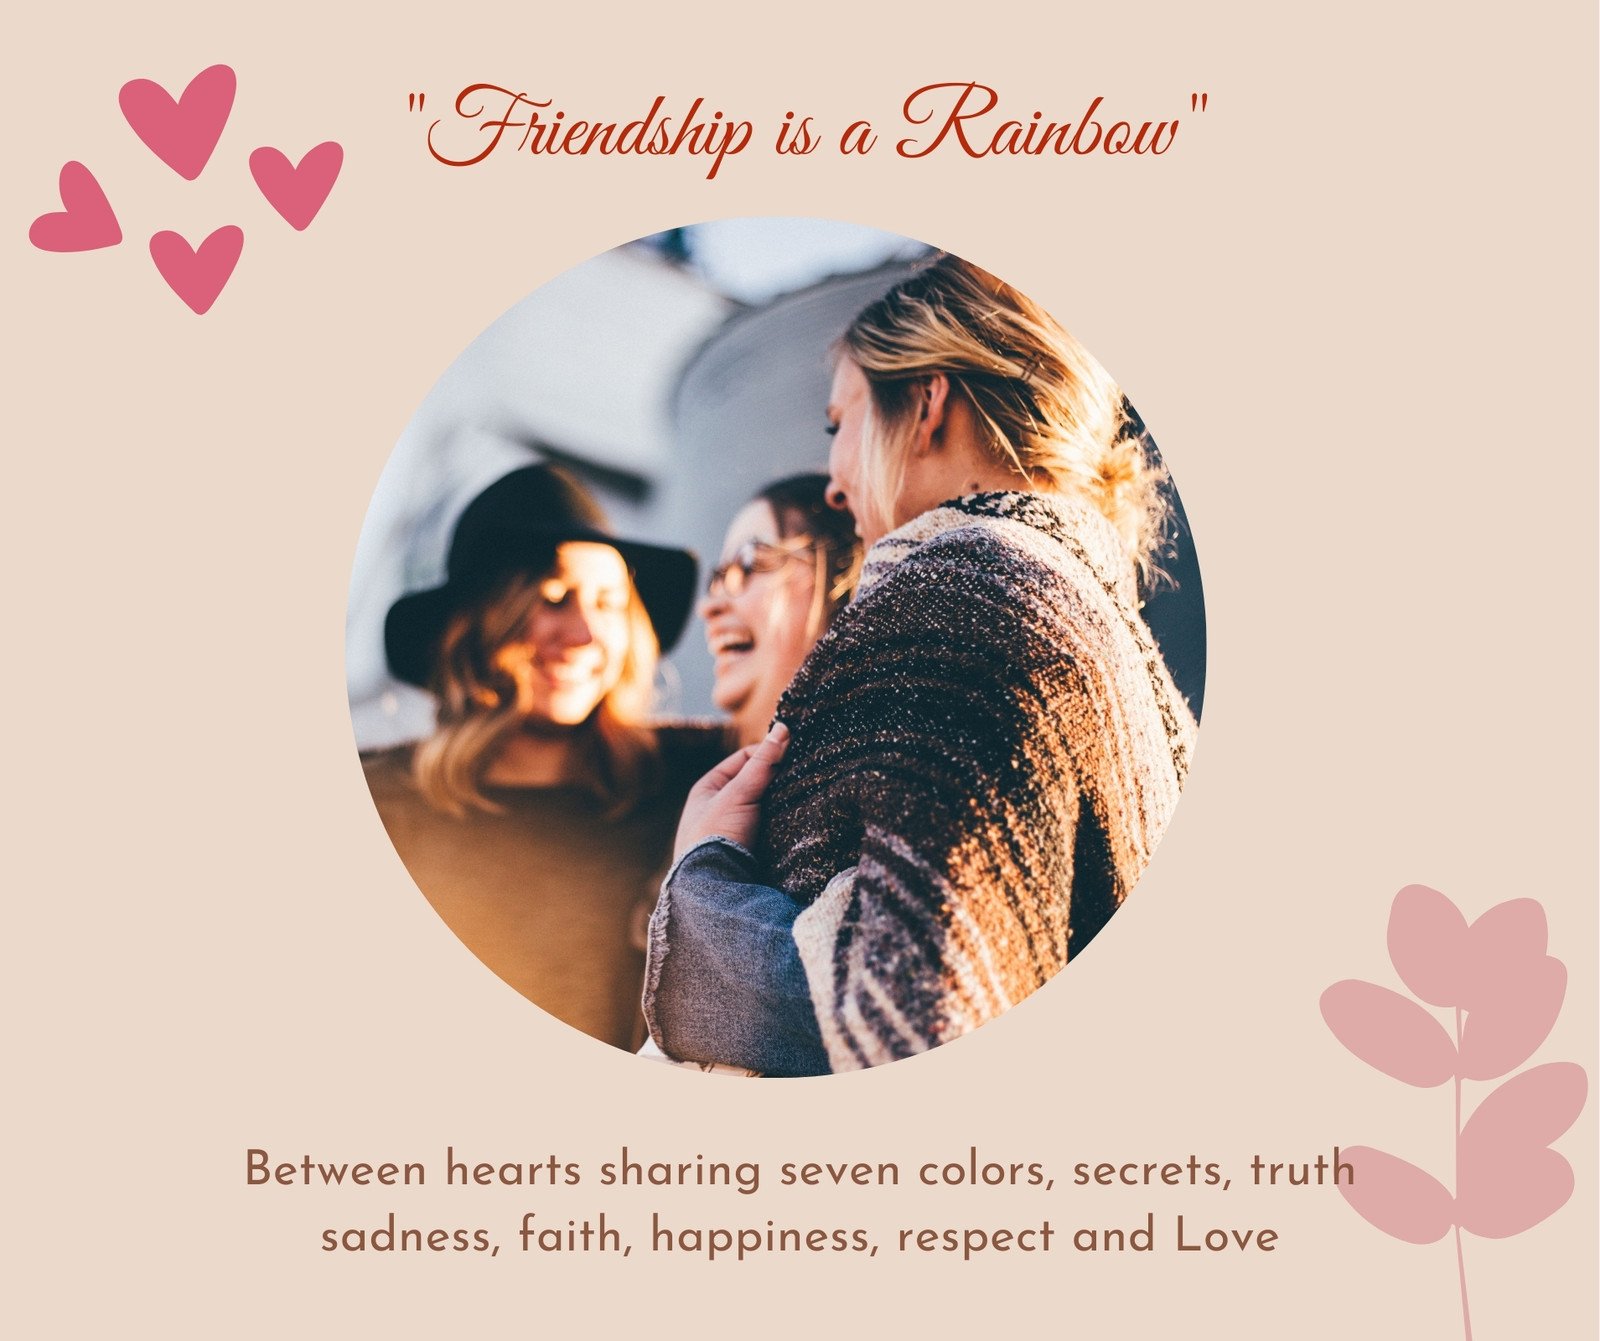 quotations on friendship for facebook cover page